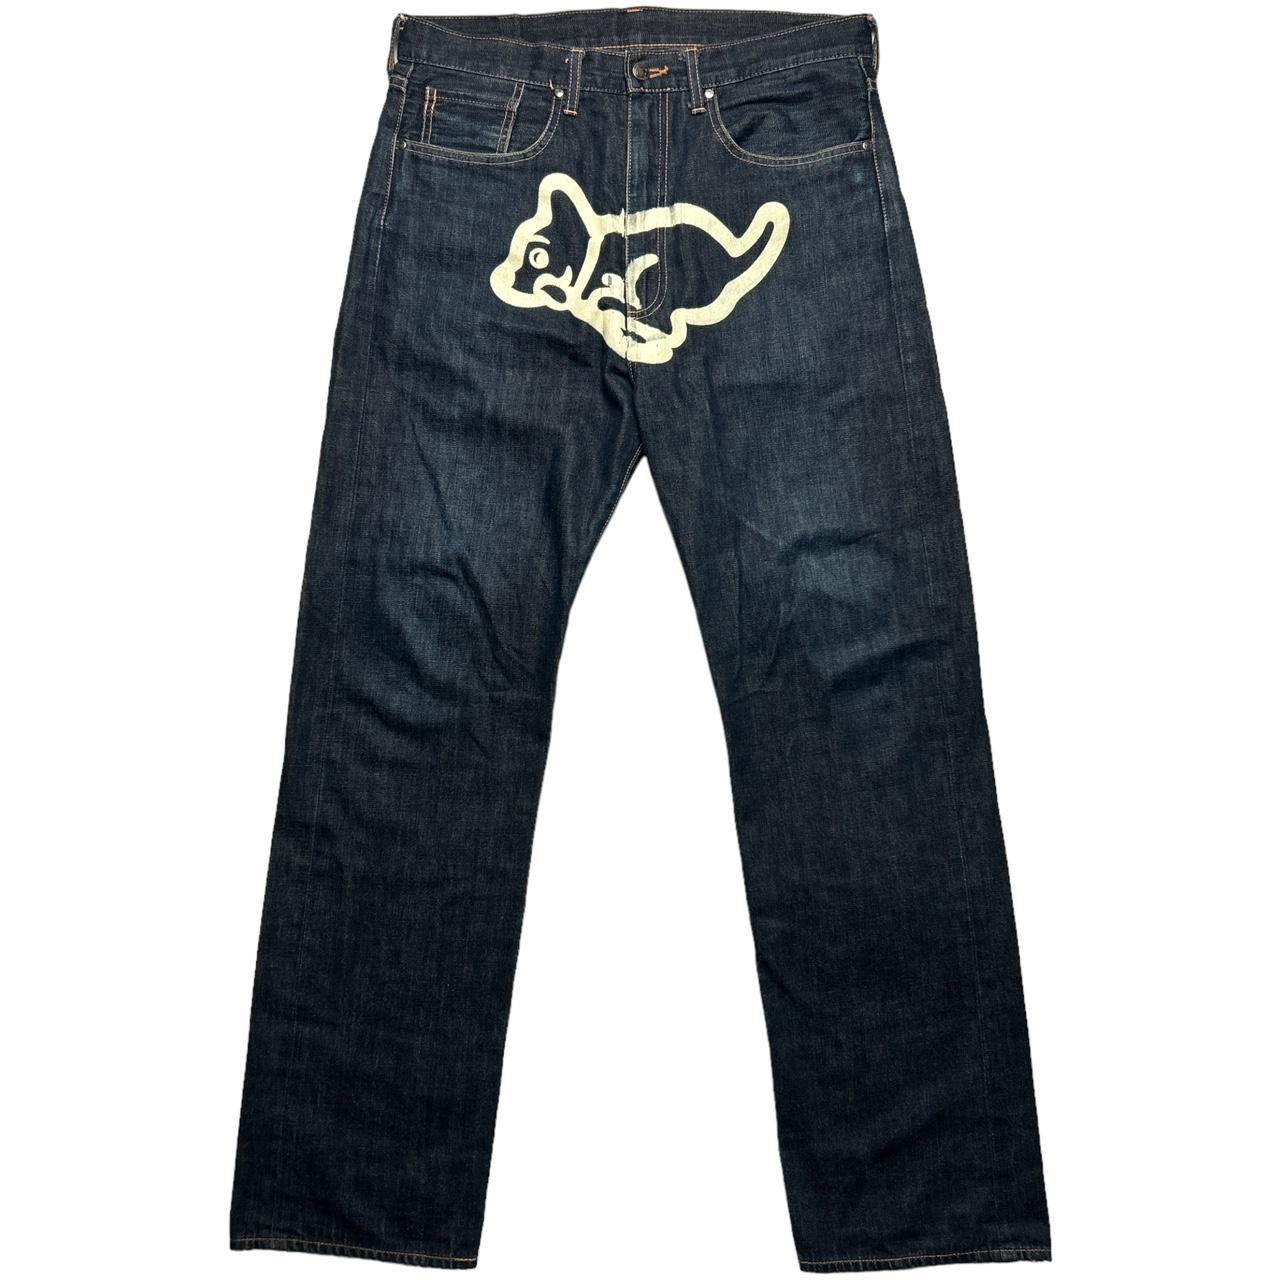 Running Pup Jeans (32")